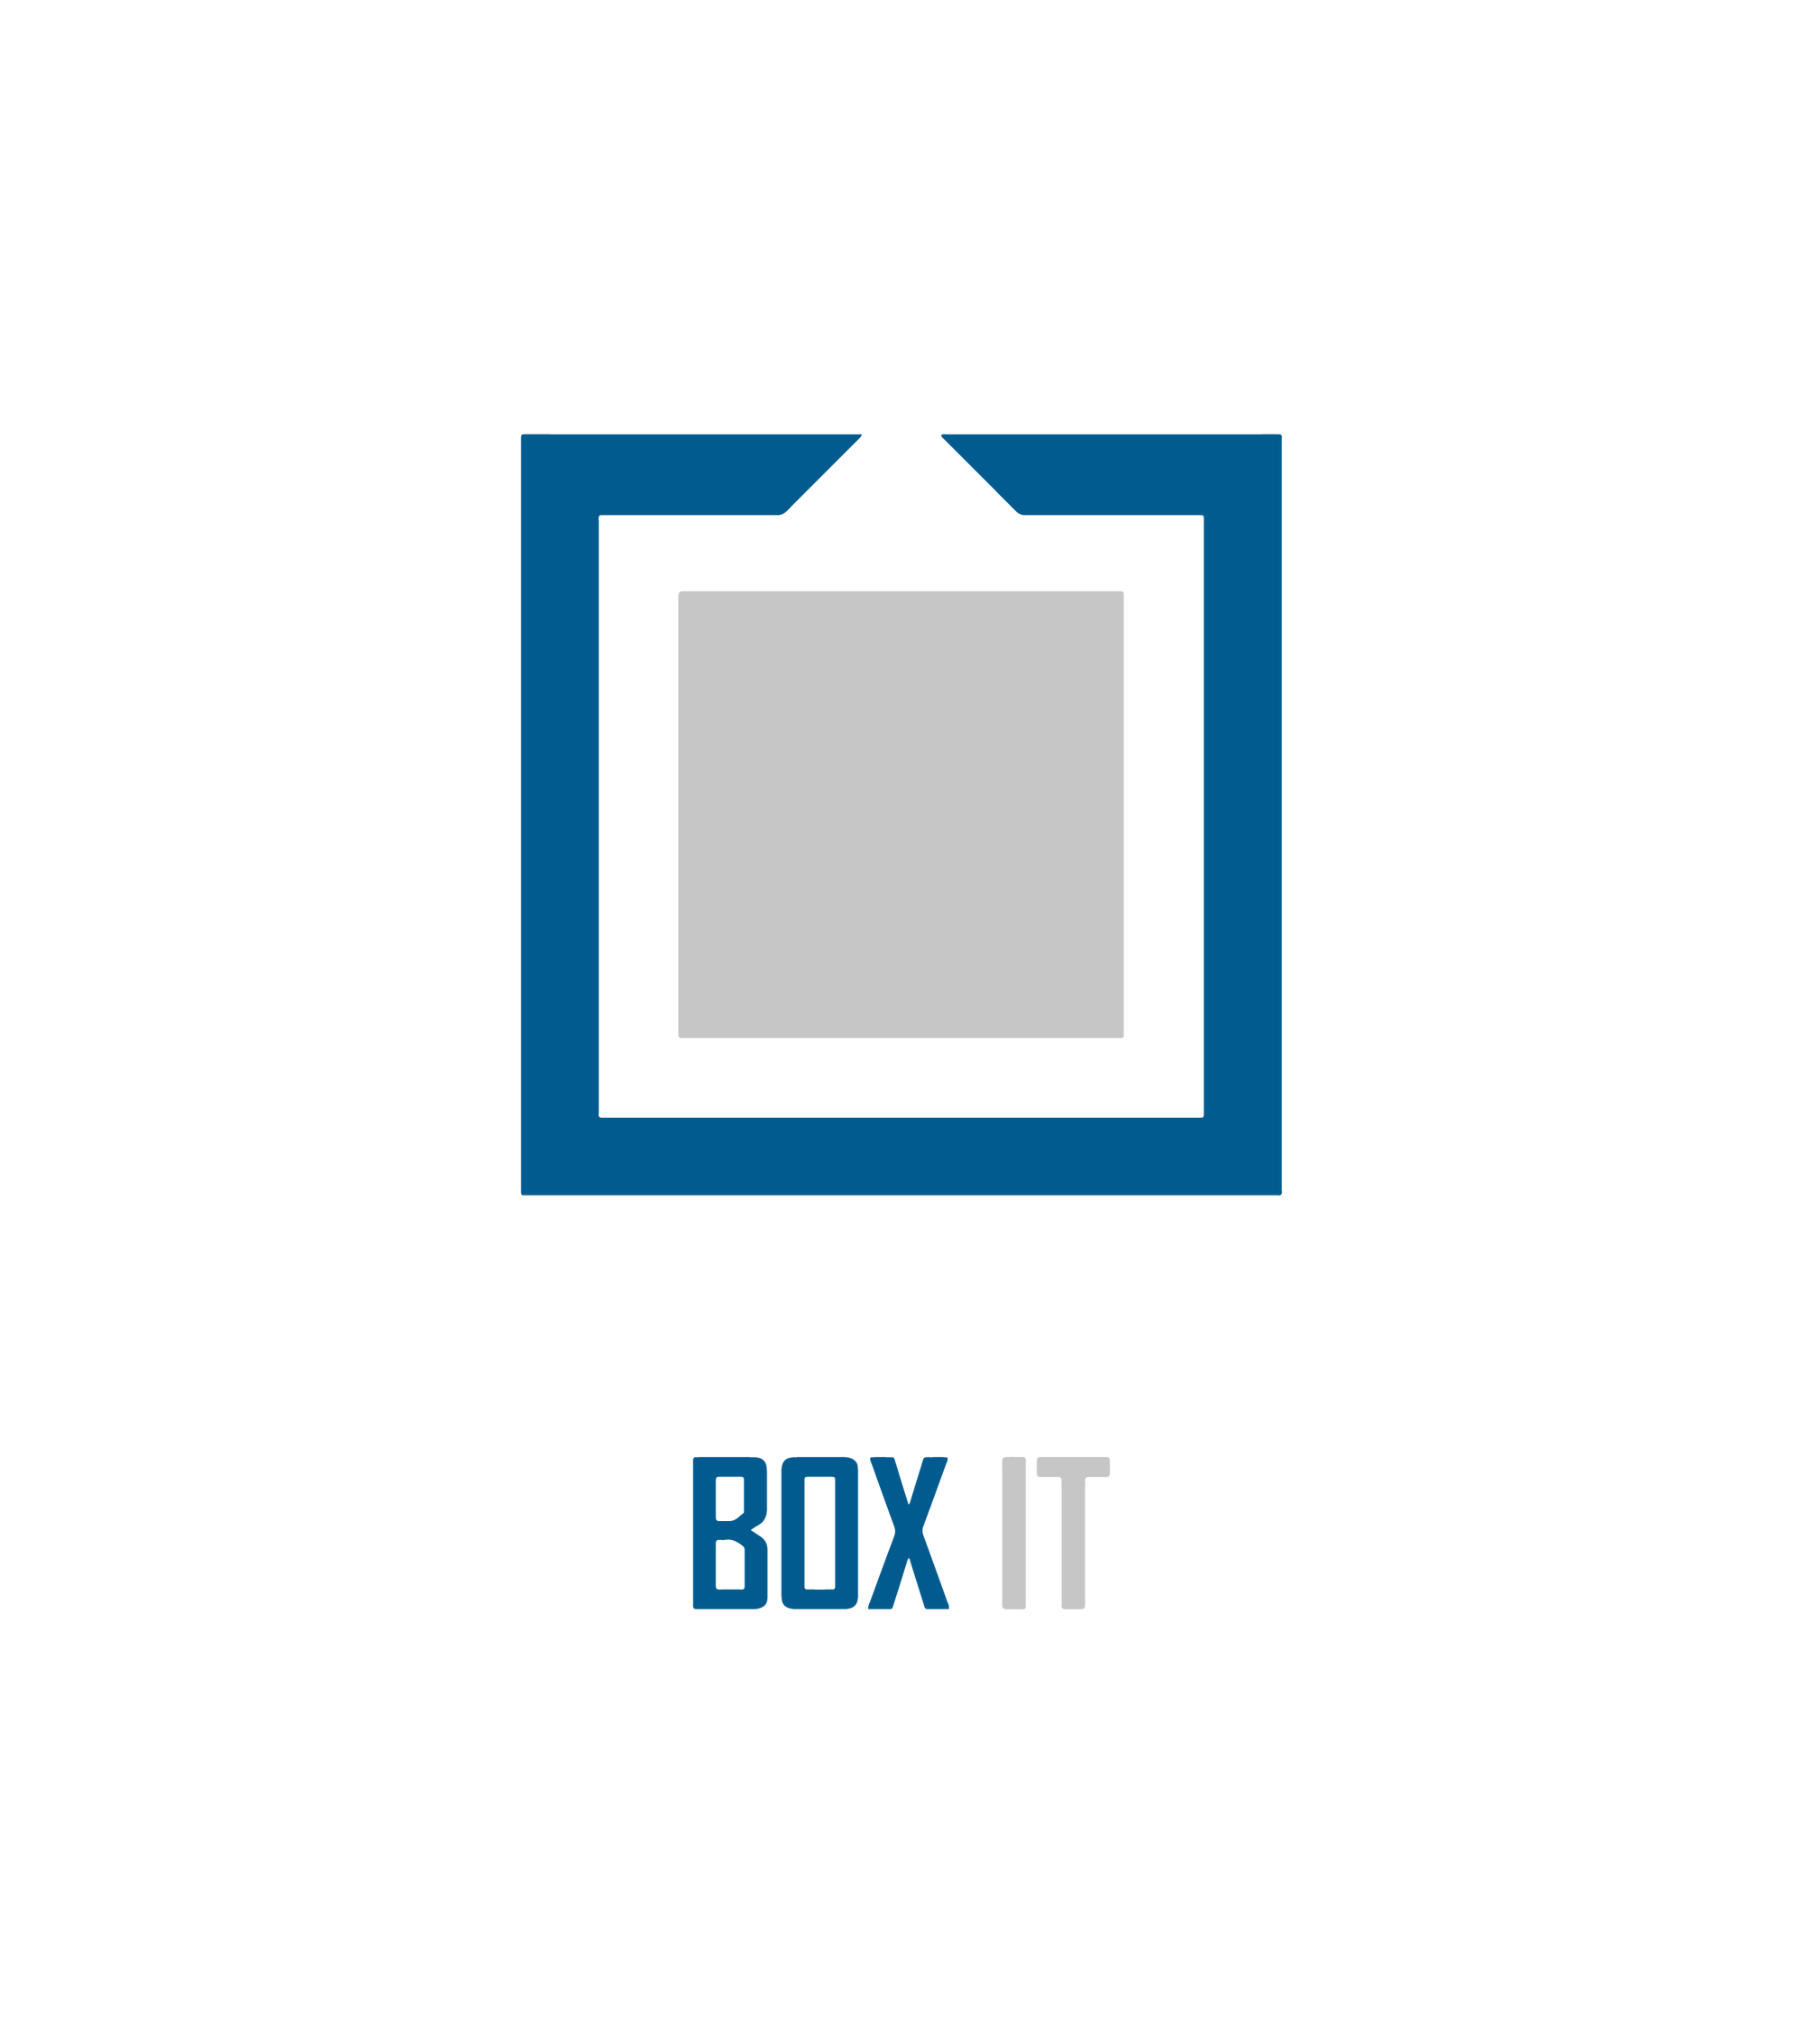 Cargo Packaging icon for Box It - Cargo packaging offers variety of boxes for shipping and storage 